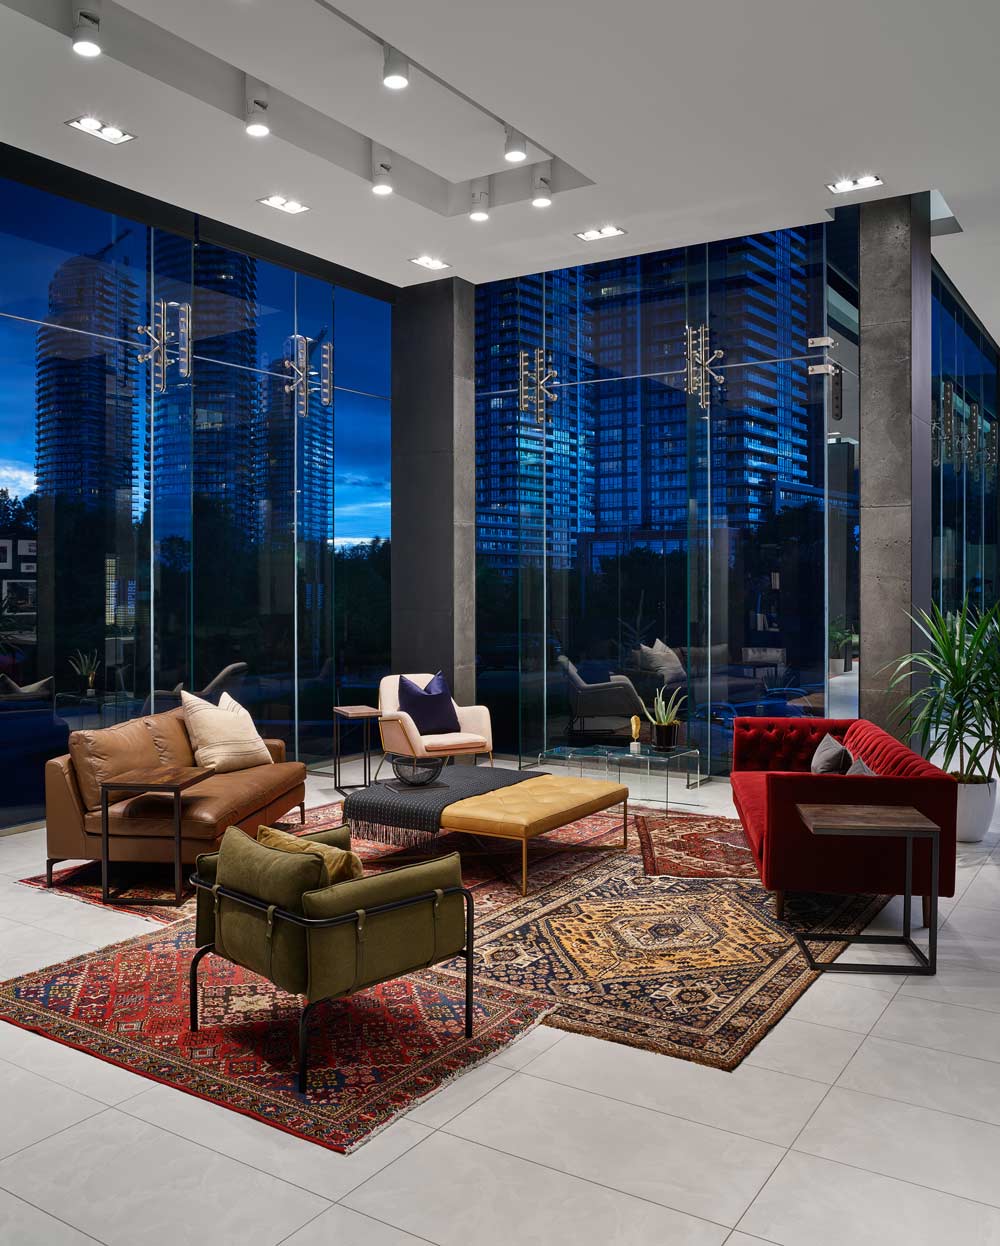 A journey through eclectic luxury in this condo presentation centre